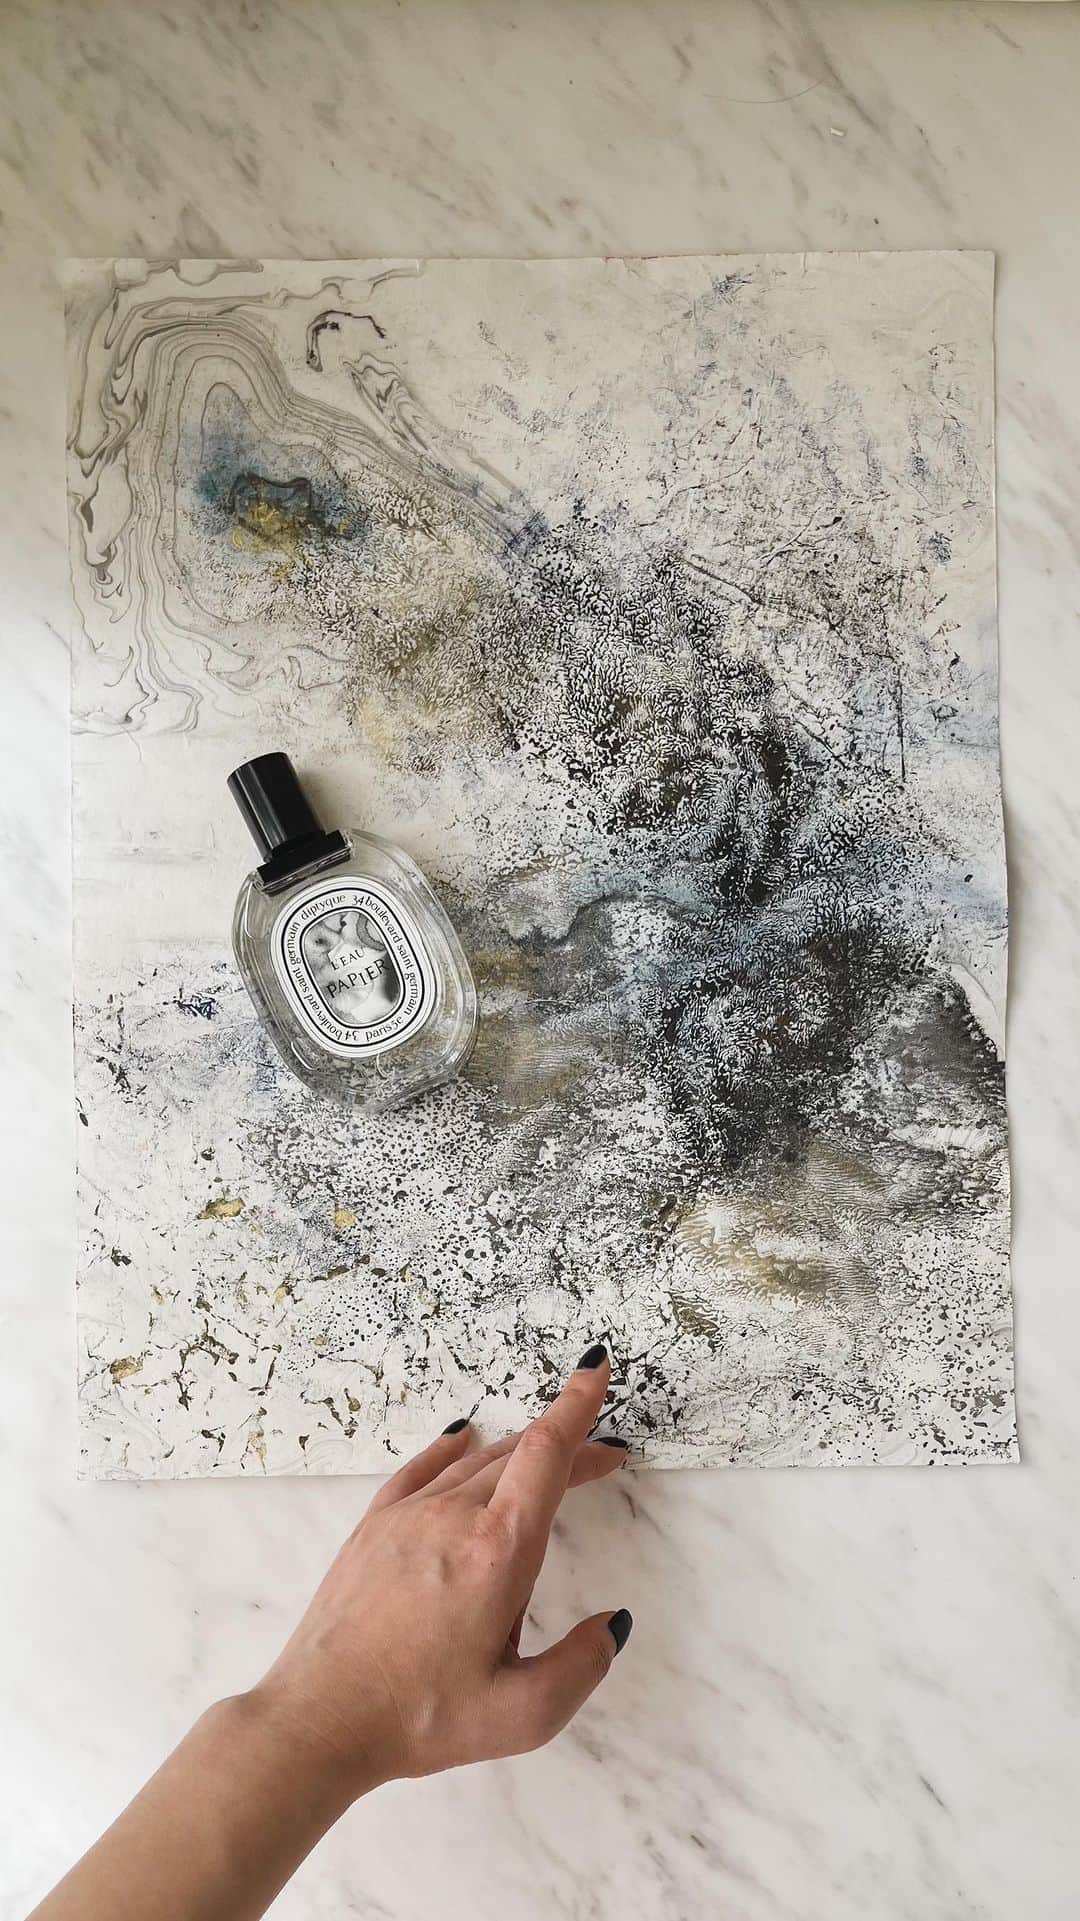 Ruby Kwanのインスタグラム：「The perfect perfume for my painting. 🖤 L’Eau Papier 紙墨之水淡香水   Searching Gold Within (Apr 2023) 45.5 x 35 cm Ink, acrylic and graphite on xuan paper  People tends to search for the meaning of life.  Who am I?  Why I am here?  What is the meaning or value of my life?  While people look for the answer in the physical world.  Some may find fame, some may find wealth, and some may find excitement and achievement.   To me, the true gold is not something from the external world.  I believe from the day I was born, it ignited. It keeps radiate from within, day and night.  Life gives me experience, brings me life lessons.  These learnings help me to peel off layer by layer, to open door to door and find the gold within my very own self.  Gold is everywhere! Like the air and energy around me, no need to search.  #rubykwanart newinkart #hongkong #hongkongartist #新水墨 #香港新水墨 #abstractart #abstractink #chineseink   @diptyque #diptyque #diptyqueparis #LEauPapier #紙墨之水」